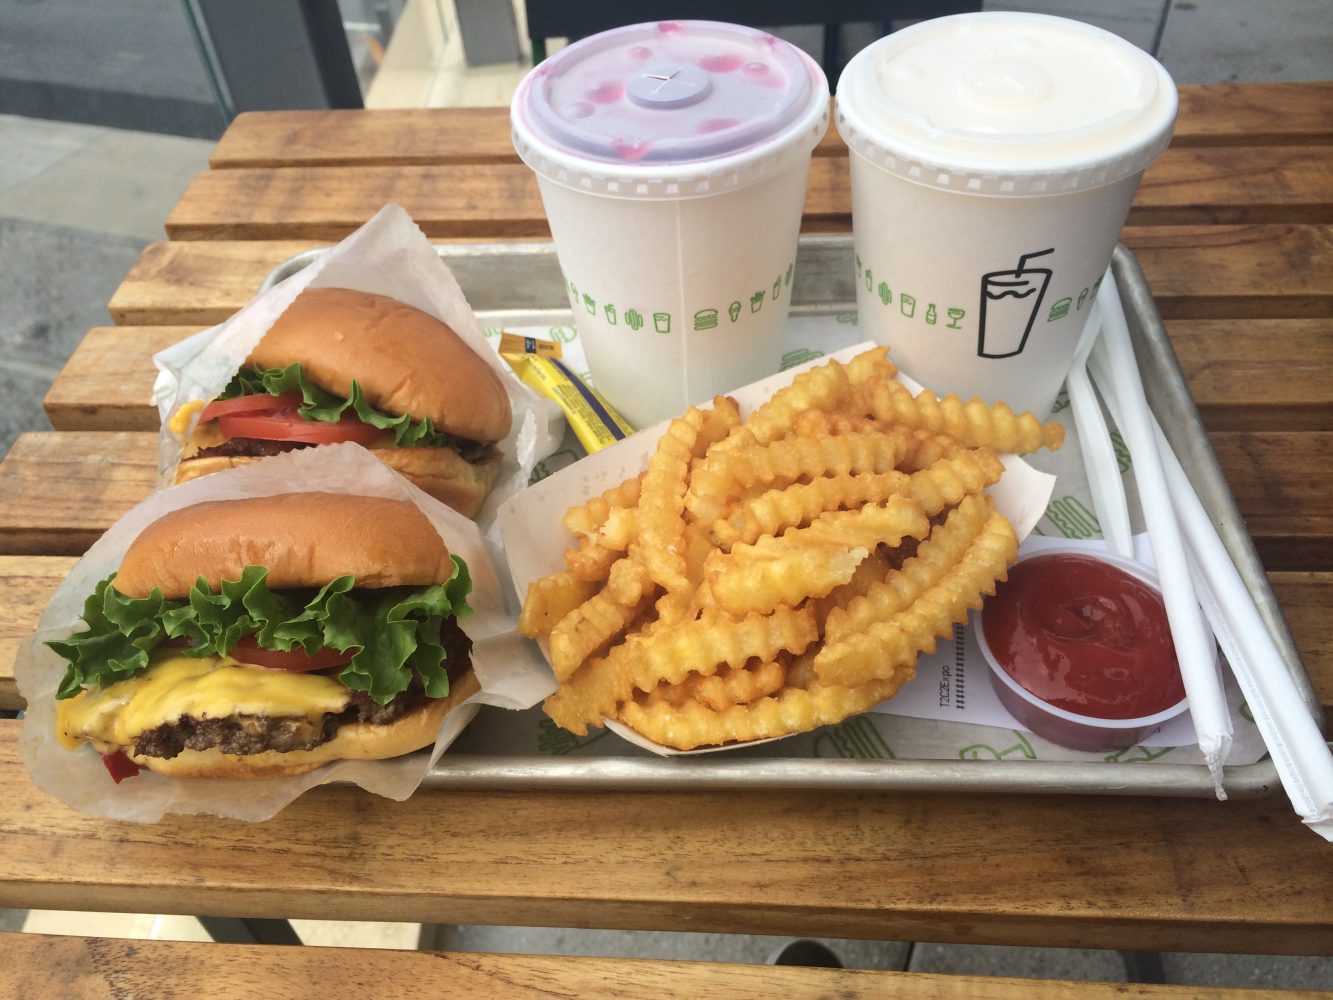 SHAKE IT OFF: Shake Shack opened up in Buckhead with special southern-style shakes and their world-renowned burgers and crinkle-cut fries.